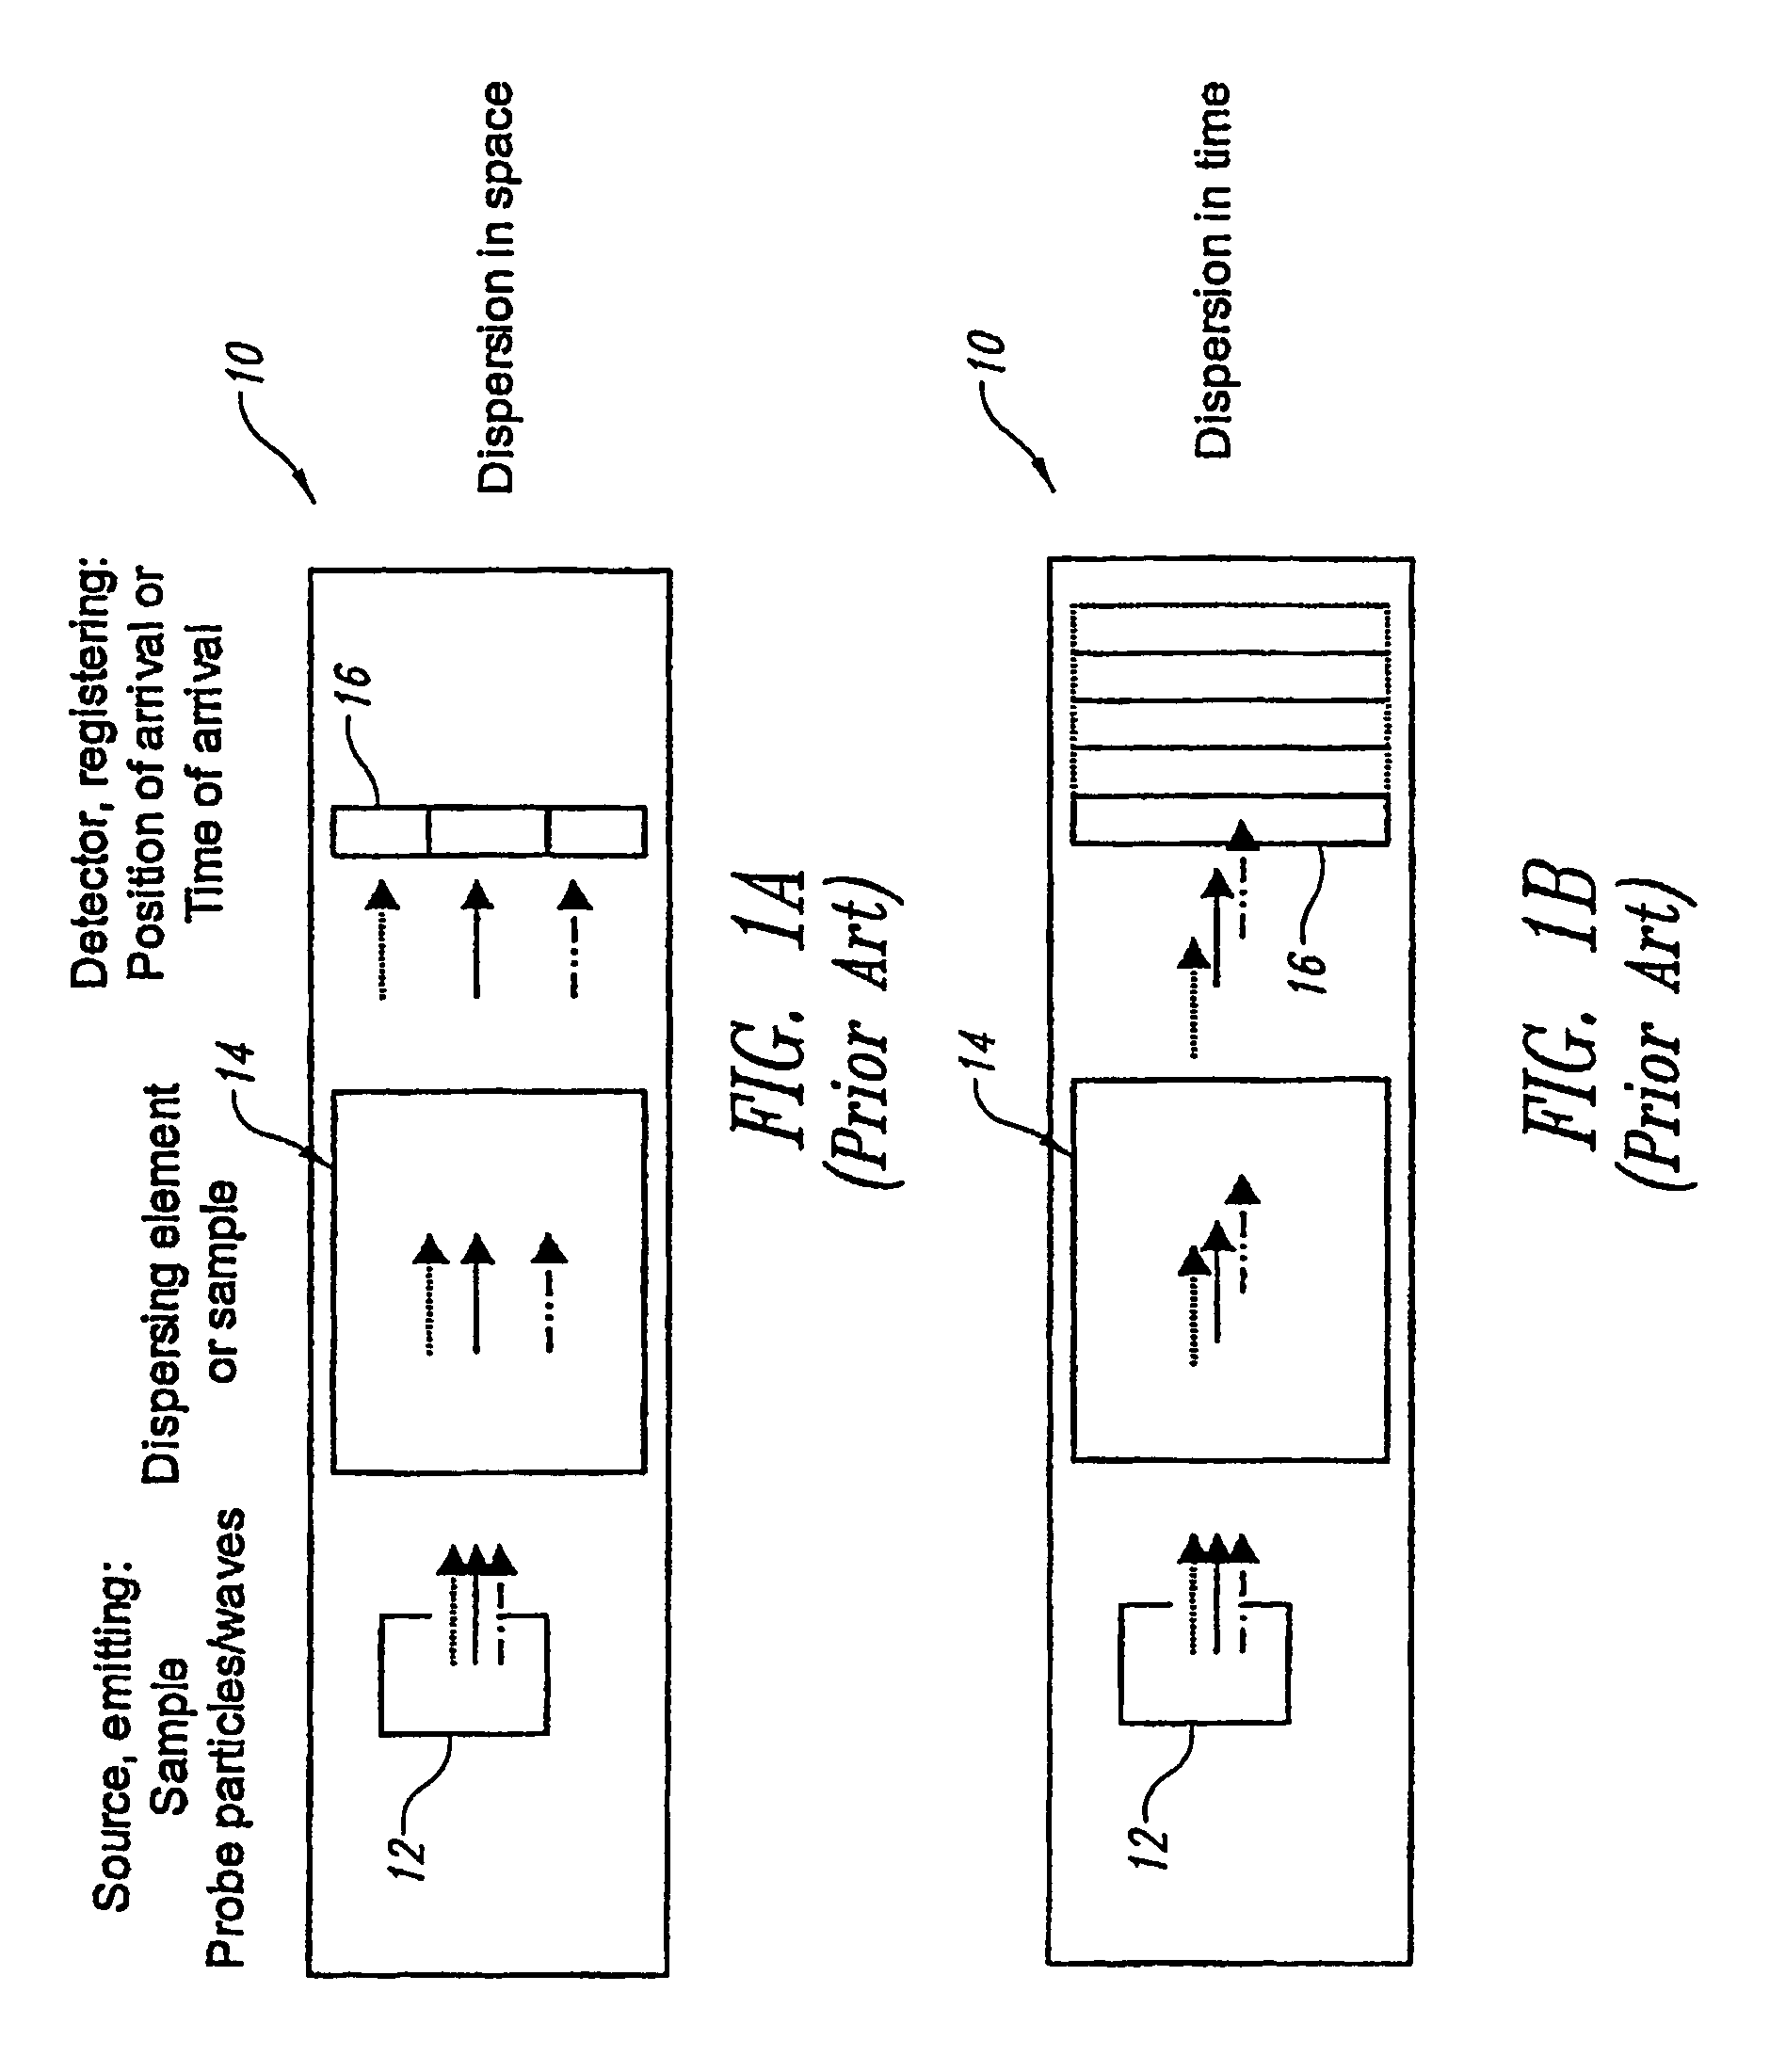 Analytical instruments using a pseudorandom array of sources, such as a micro-machined mass spectrometer or monochromator